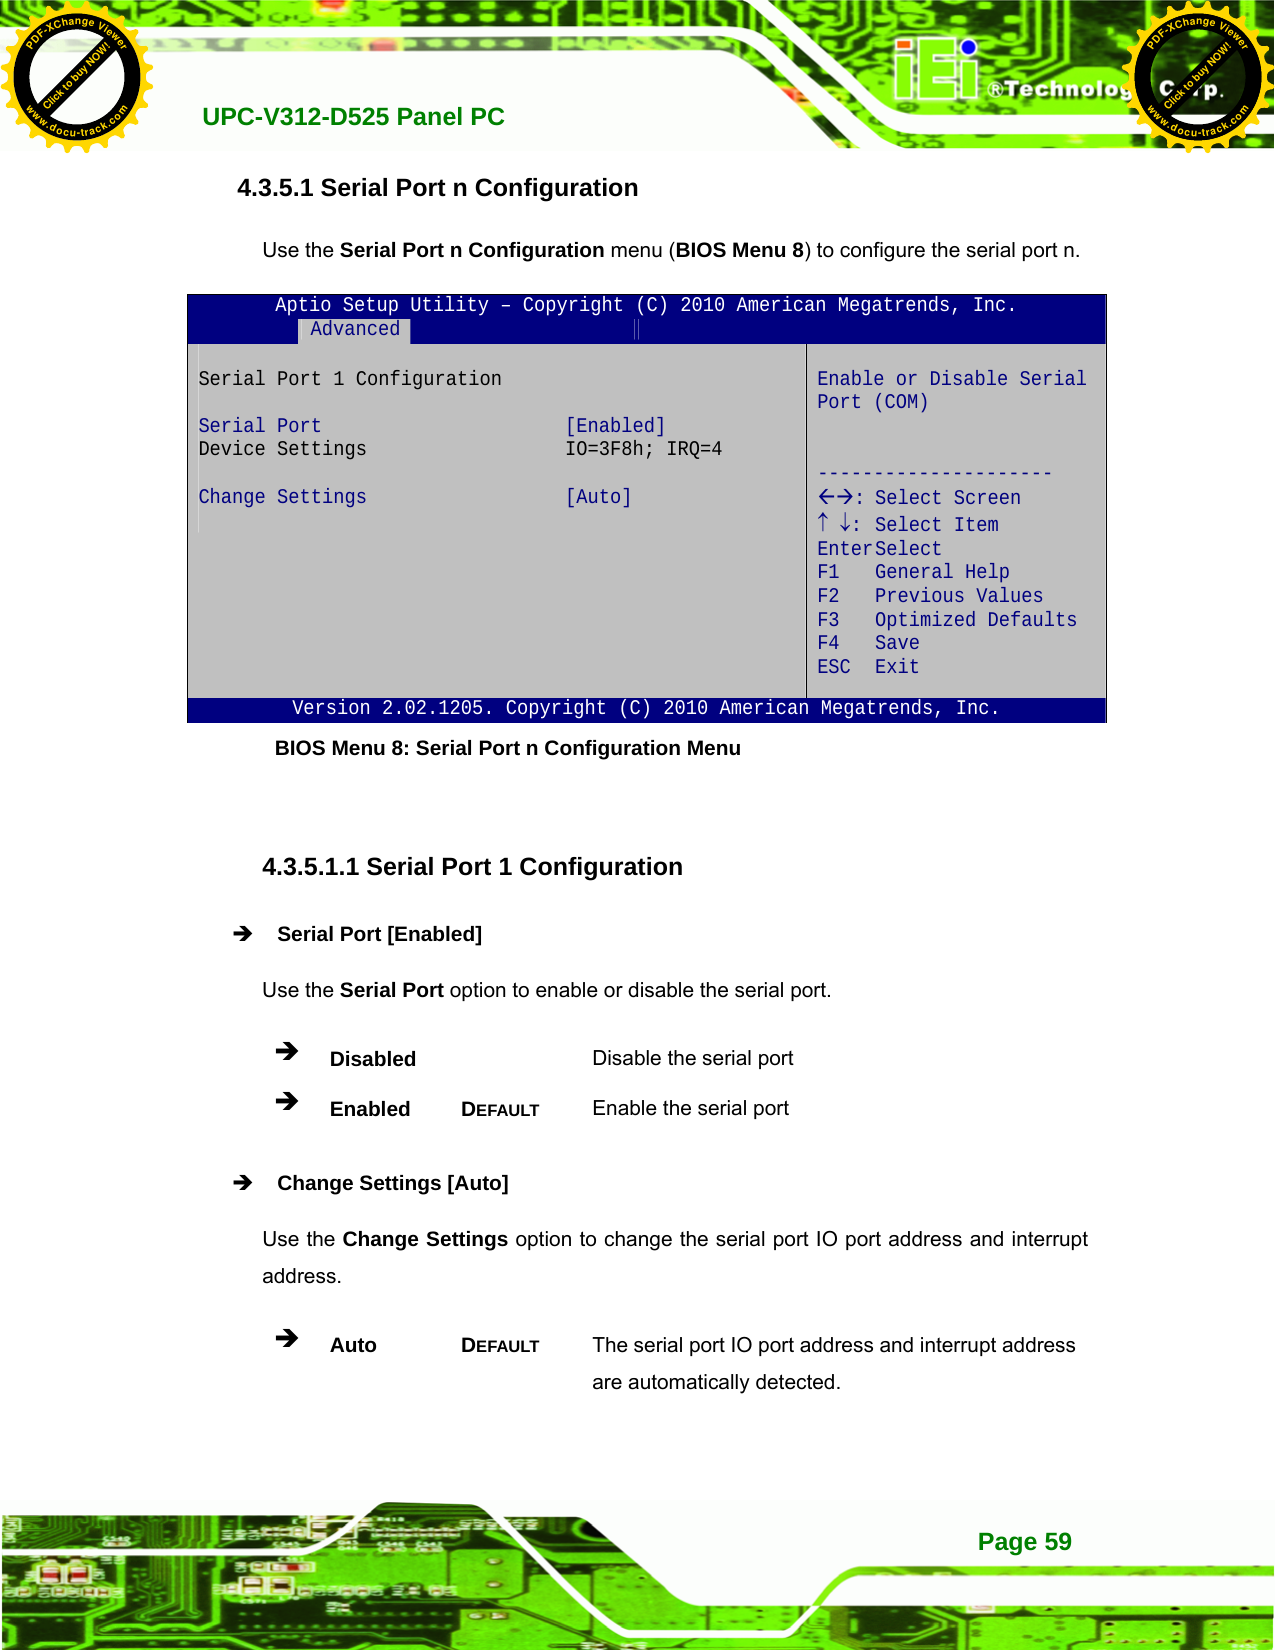   UPC-V312-D525 Panel PC Page 594.3.5.1 Serial Port n Configuration Use the Serial Port n Configuration menu (BIOS Menu 8) to configure the serial port n. Aptio Setup Utility – Copyright (C) 2010 American Megatrends, Inc.  Advanced              Serial Port 1 Configuration  Serial Port  [Enabled] Device Settings  IO=3F8h; IRQ=4  Change Settings  [Auto]    Enable or Disable Serial Port (COM)   --------------------- ÅÆ: Select Screen ↑ ↓: Select Item Enter Select F1 General Help F2 Previous Values F3 Optimized Defaults F4 Save  ESC Exit Version 2.02.1205. Copyright (C) 2010 American Megatrends, Inc. BIOS Menu 8: Serial Port n Configuration Menu   4.3.5.1.1 Serial Port 1 Configuration Î Serial Port [Enabled] Use the Serial Port option to enable or disable the serial port. Î Disabled   Disable the serial port Î Enabled DEFAULT Enable the serial port Î Change Settings [Auto] Use the Change Settings option to change the serial port IO port address and interrupt address. Î Auto DEFAULT The serial port IO port address and interrupt address are automatically detected. Click to buy NOW!PDF-XChange Viewerwww.docu-track.comClick to buy NOW!PDF-XChange Viewerwww.docu-track.com